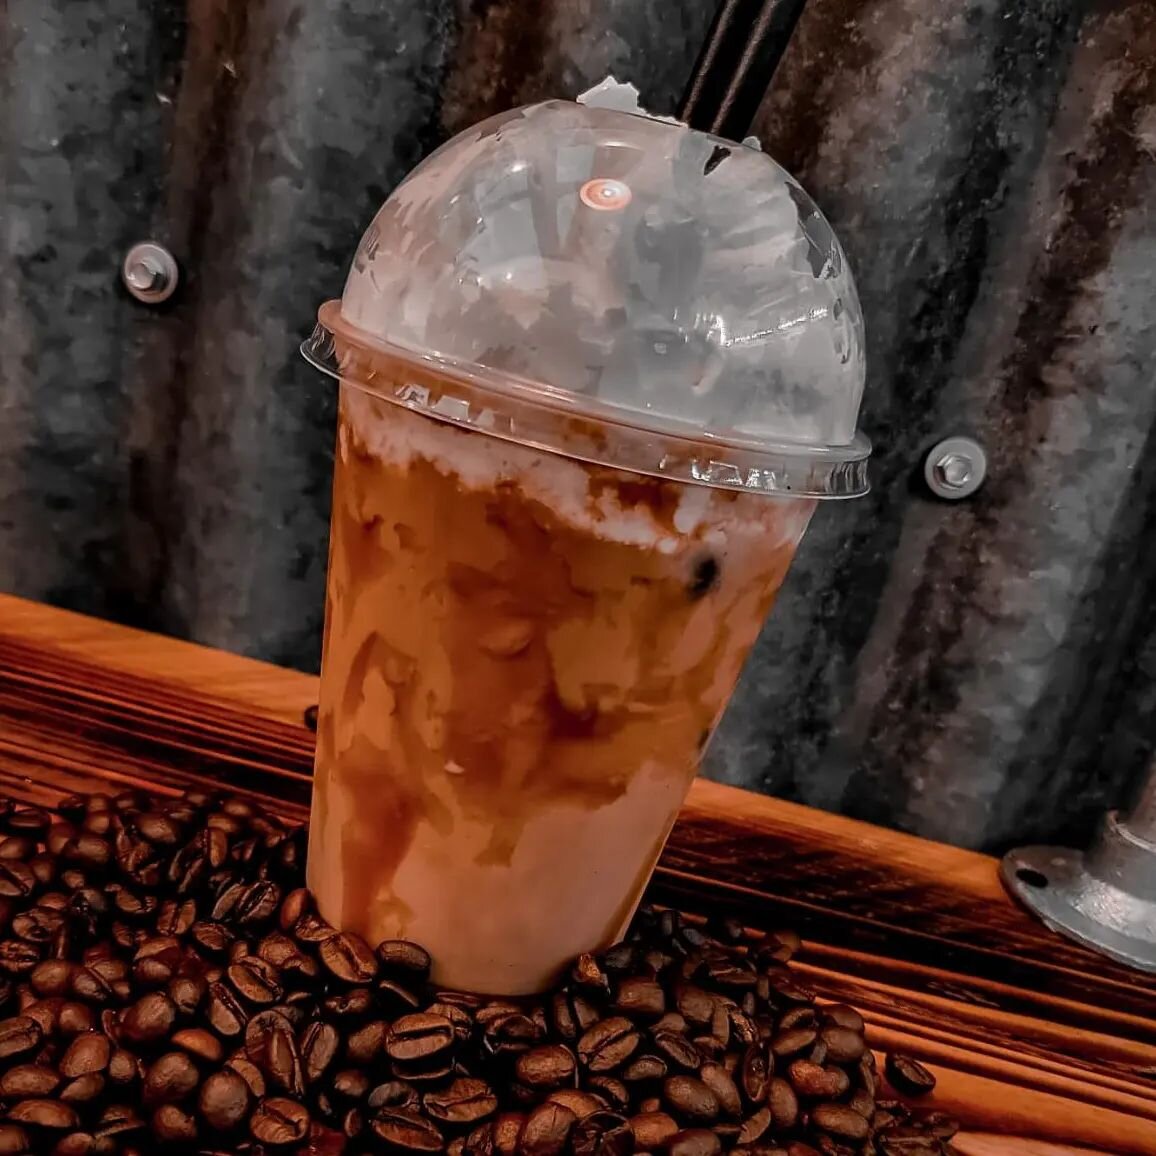 Too hot outside for your regular coffee? Make it iced 🧊☀️ 

Available with any syrup, and whipped cream at no extra cost

#fareham #farehamfoodie #coffee #instacoffee #coffeeobsessed #icedlatte #caramelicedlatte #latteart #instagood #summer #icedcof